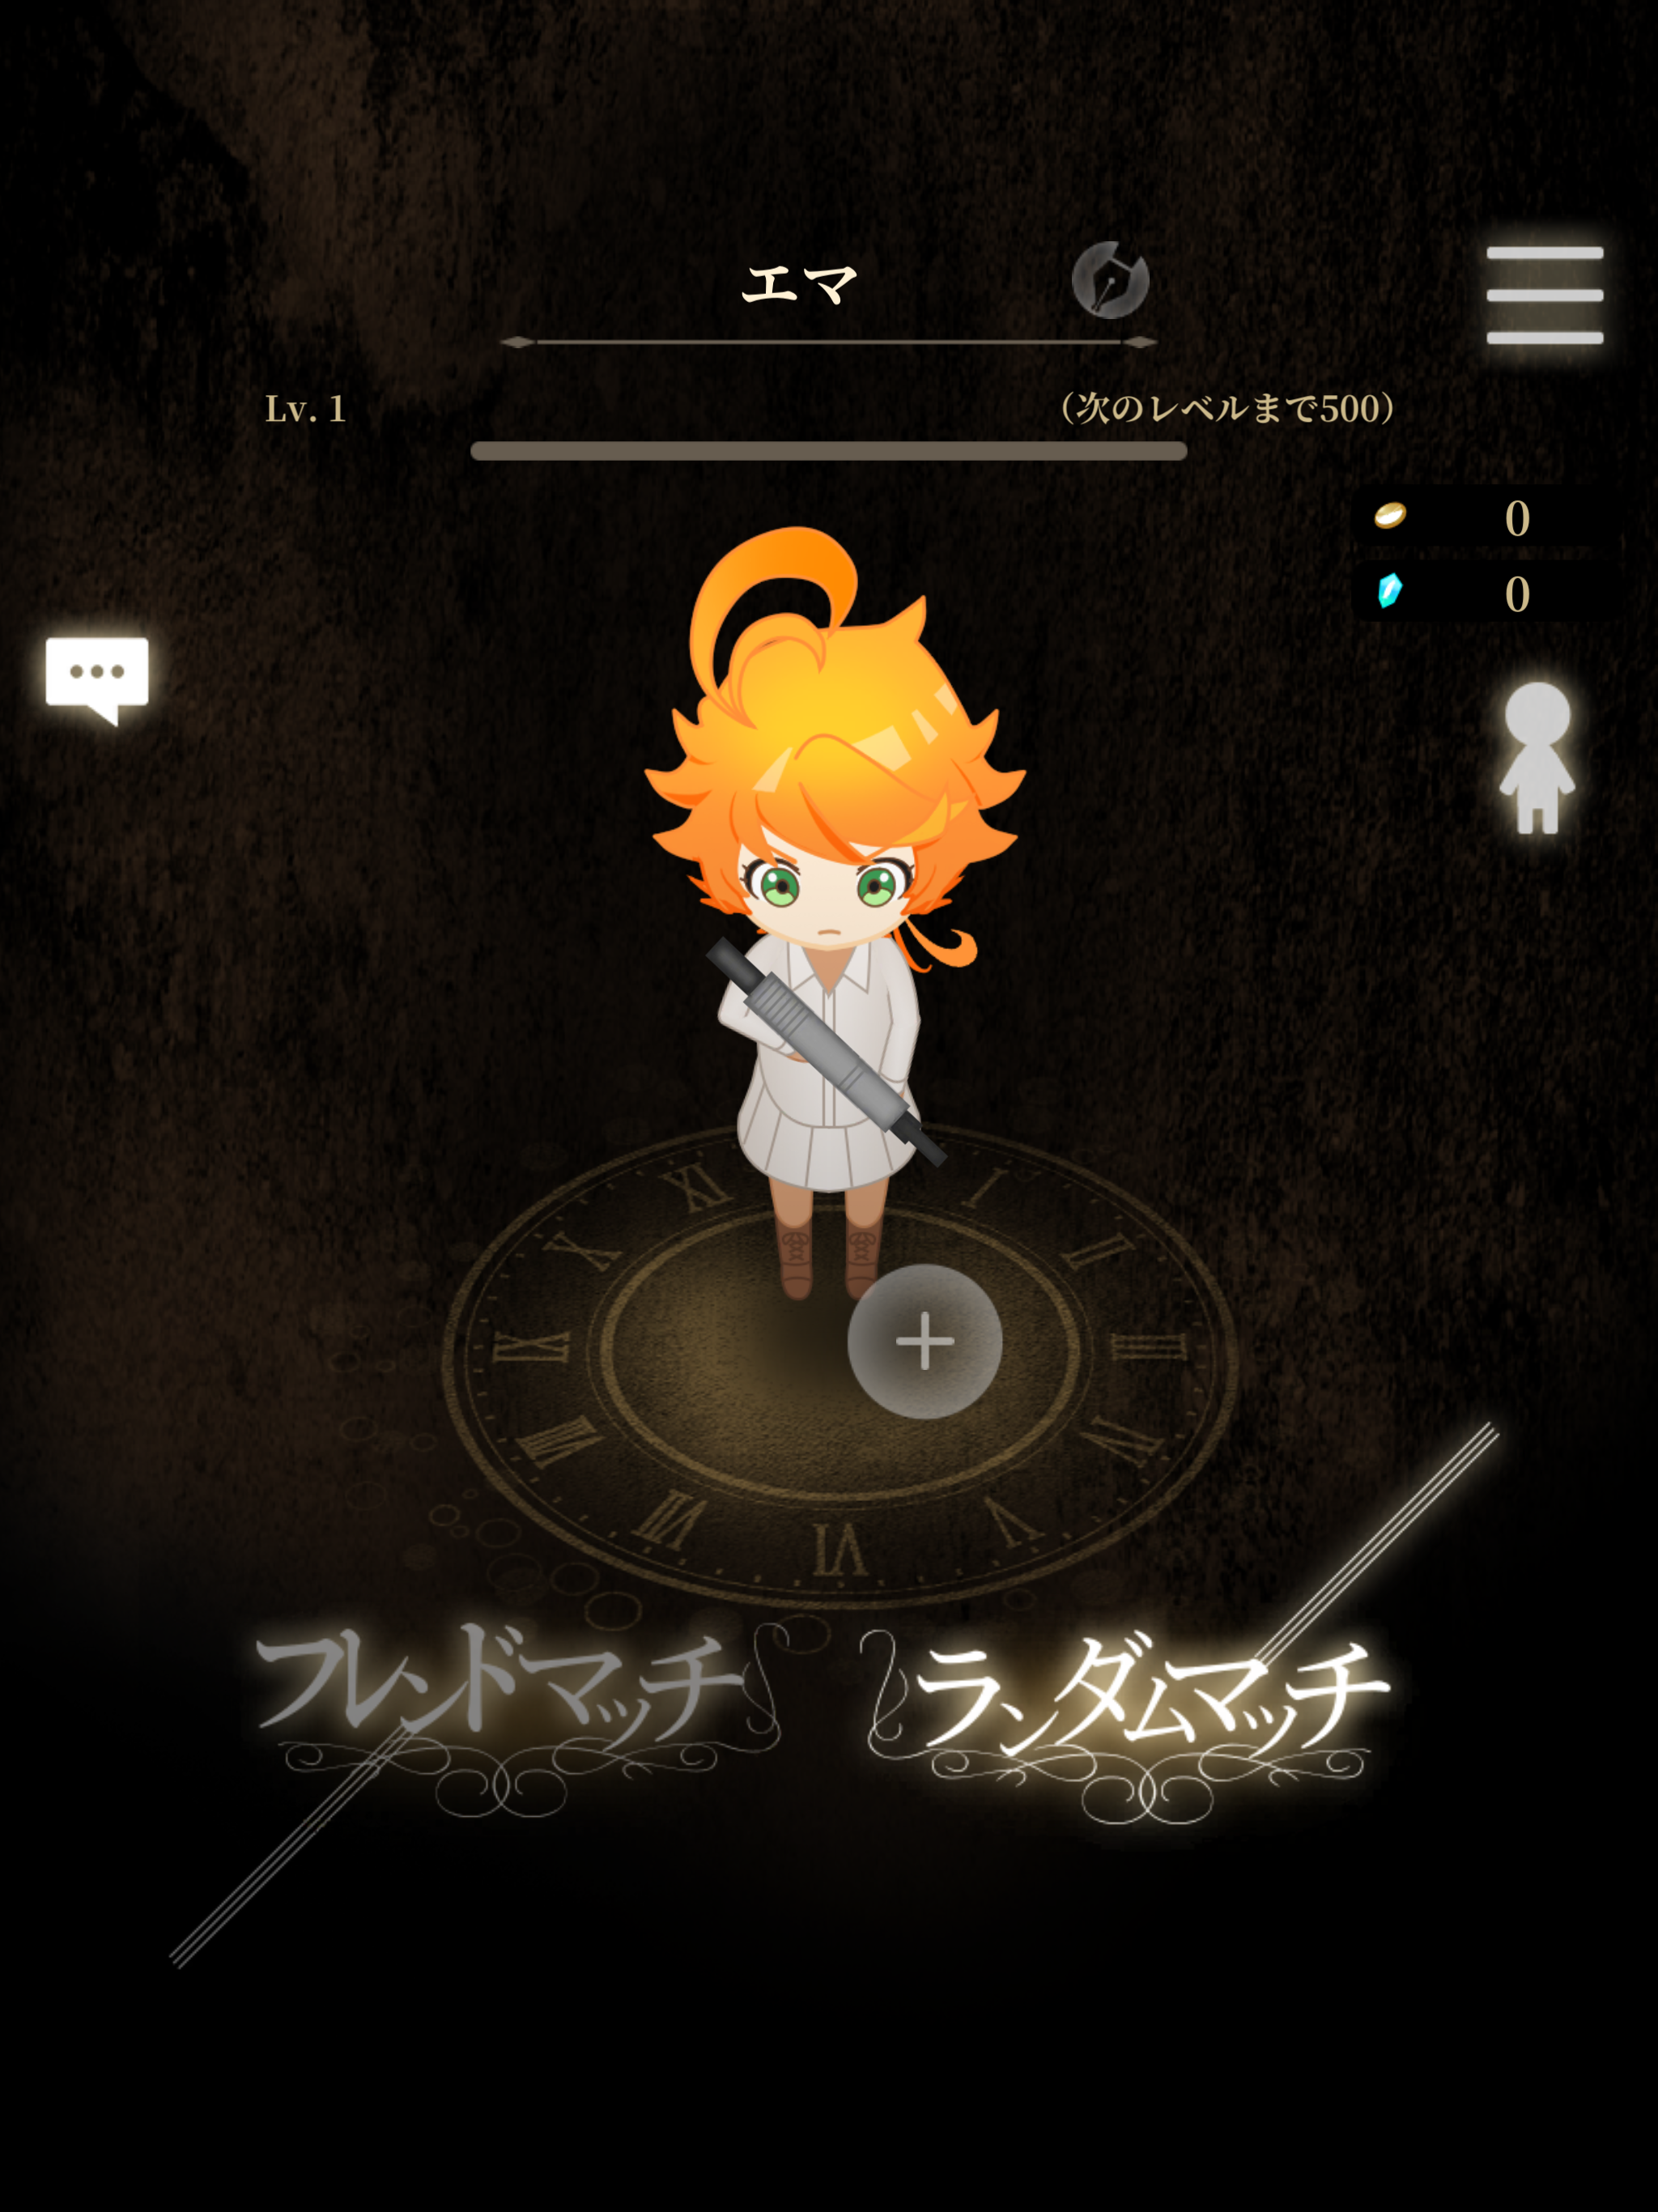 Qoo News] “The Promised Neverland: Escape From Hunting Garden